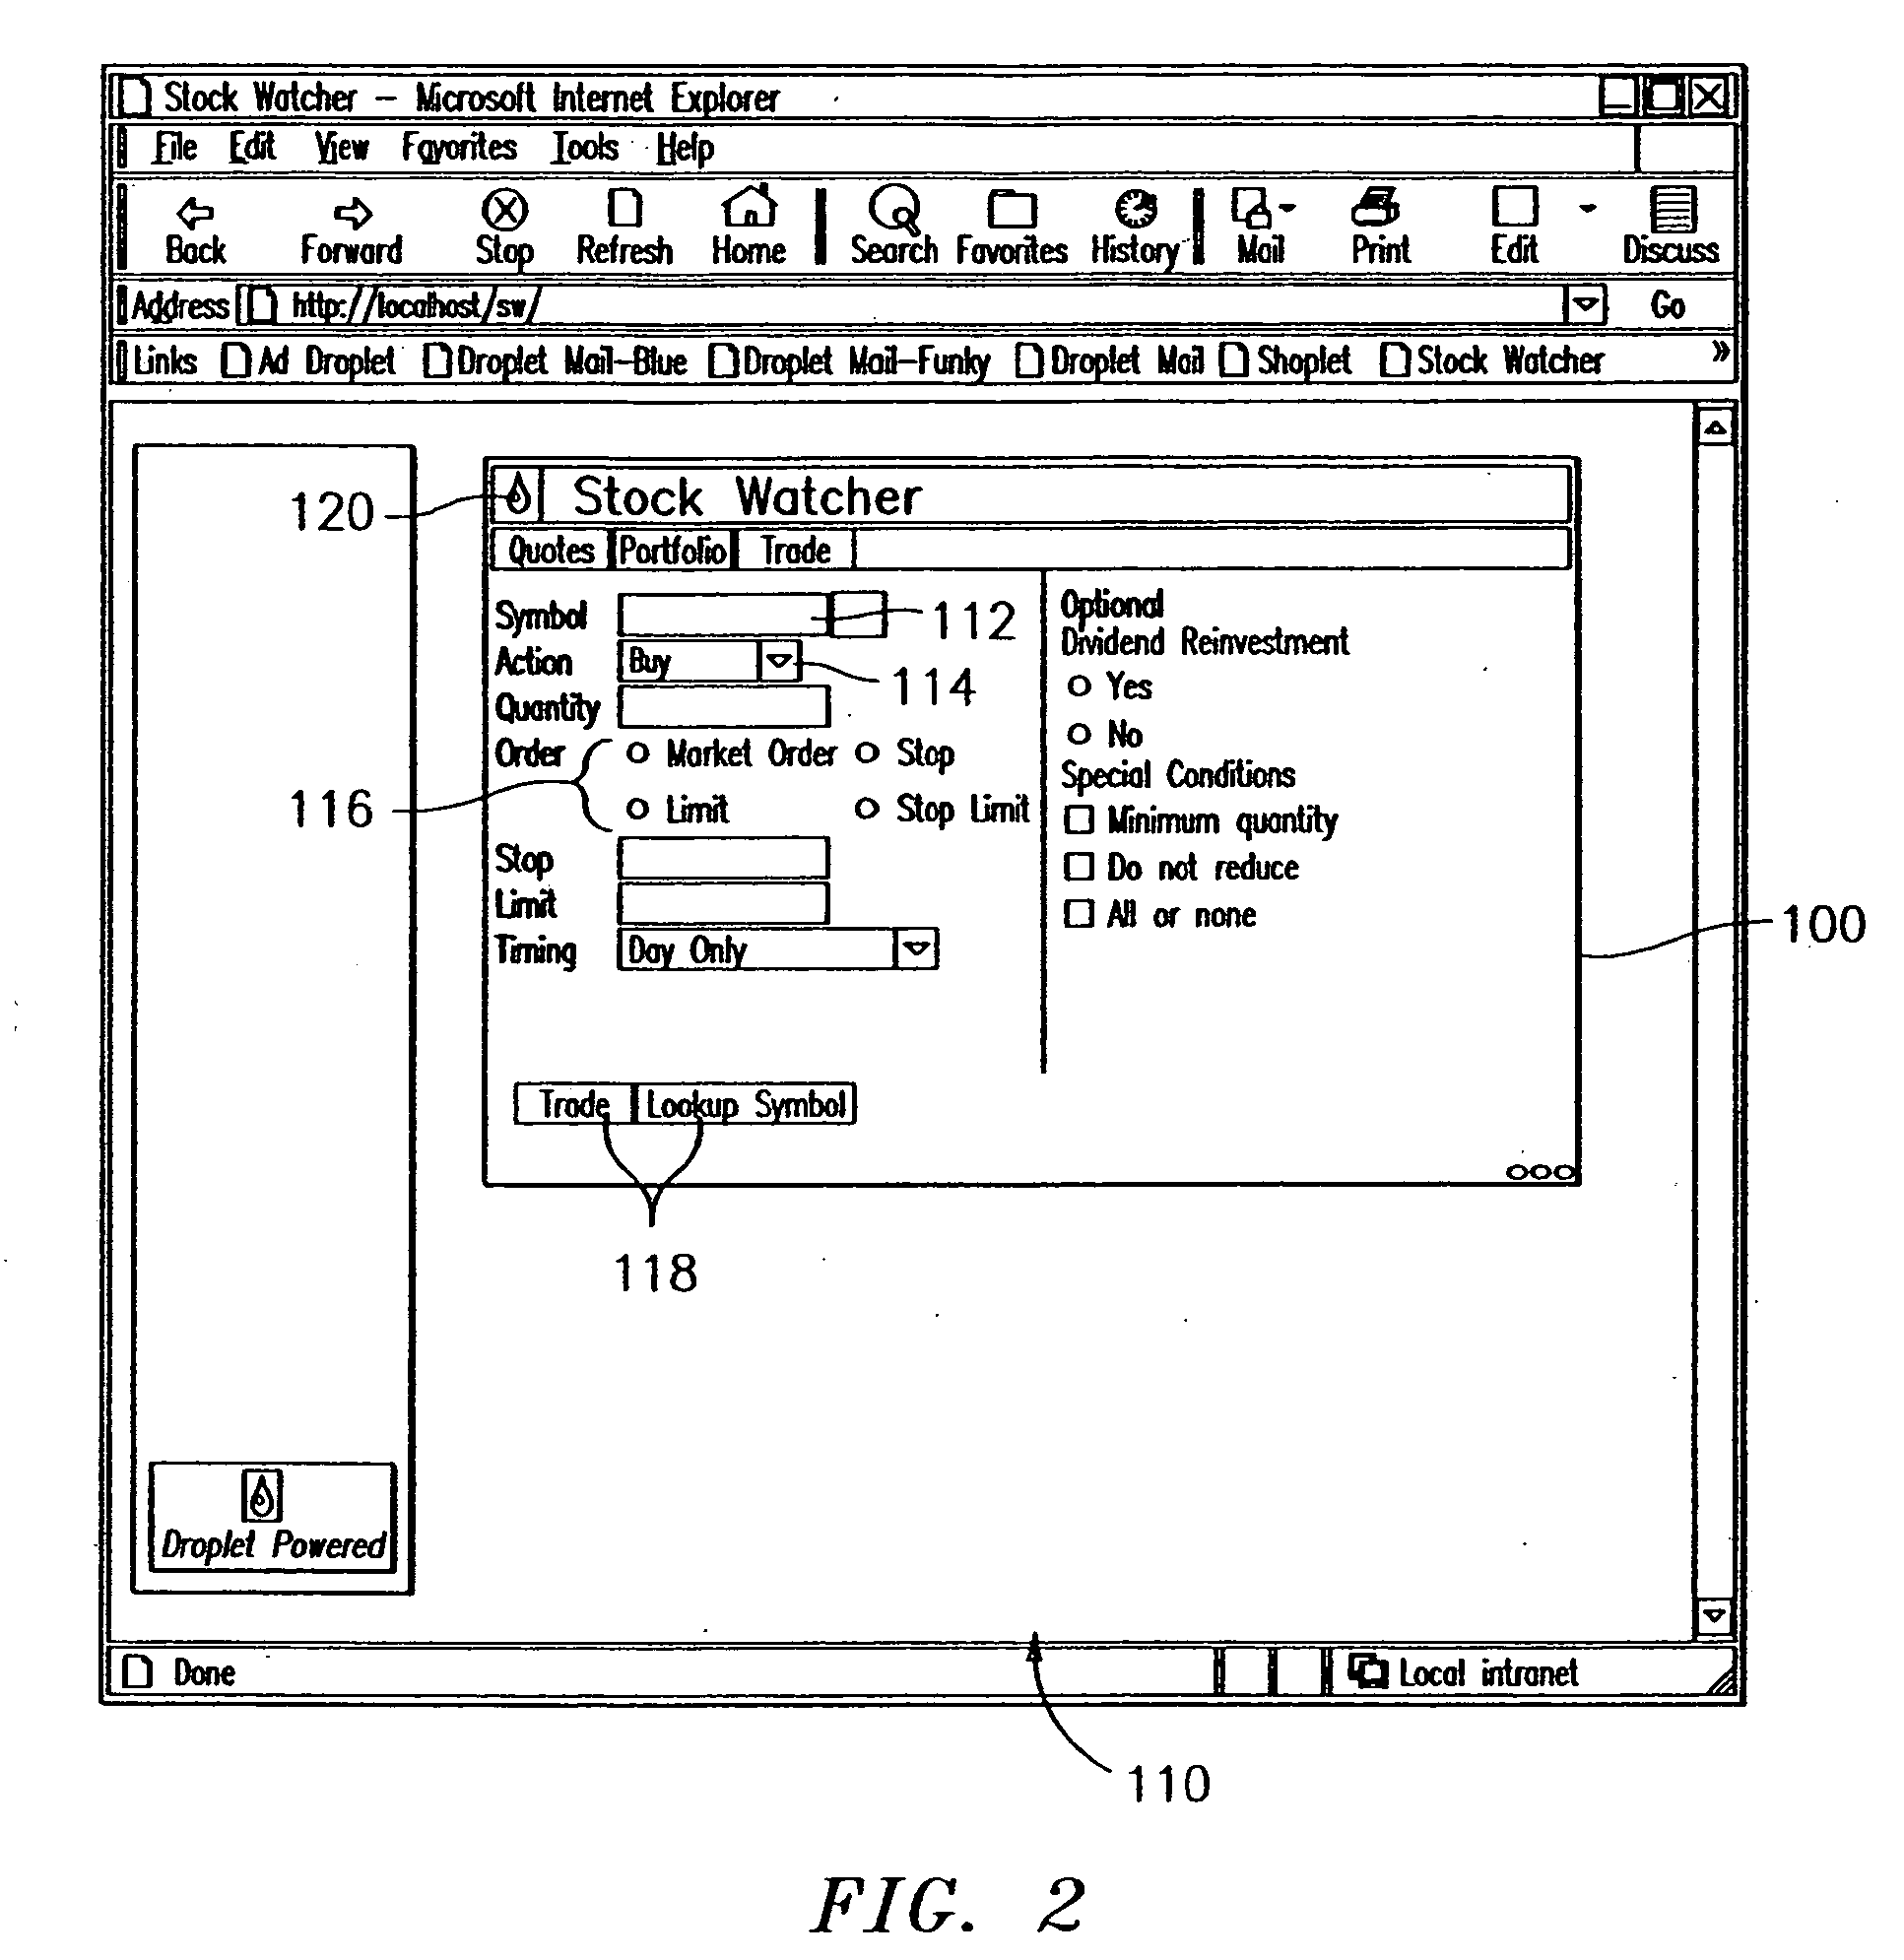 System and method for delivering remotely stored applications and information